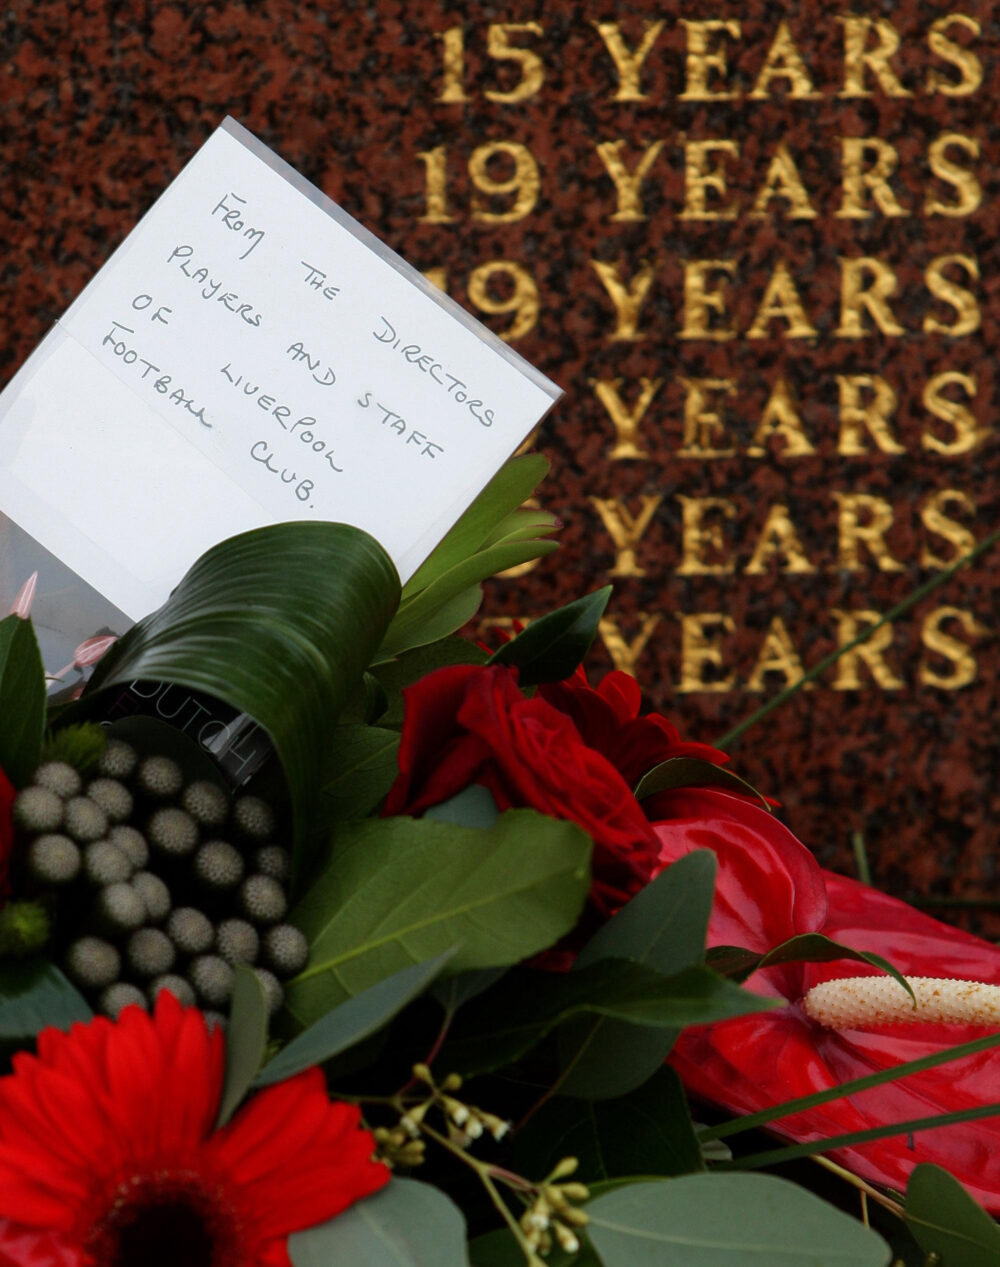 A floral tribute from Liverpool FC sits in front of the Hillsborogh Memorial before the official memorial service at Liverpool's Anfield stadium, to mark the 20th anniversary of the Hillsborough disaster in which 96 football fans died. Credit: PA